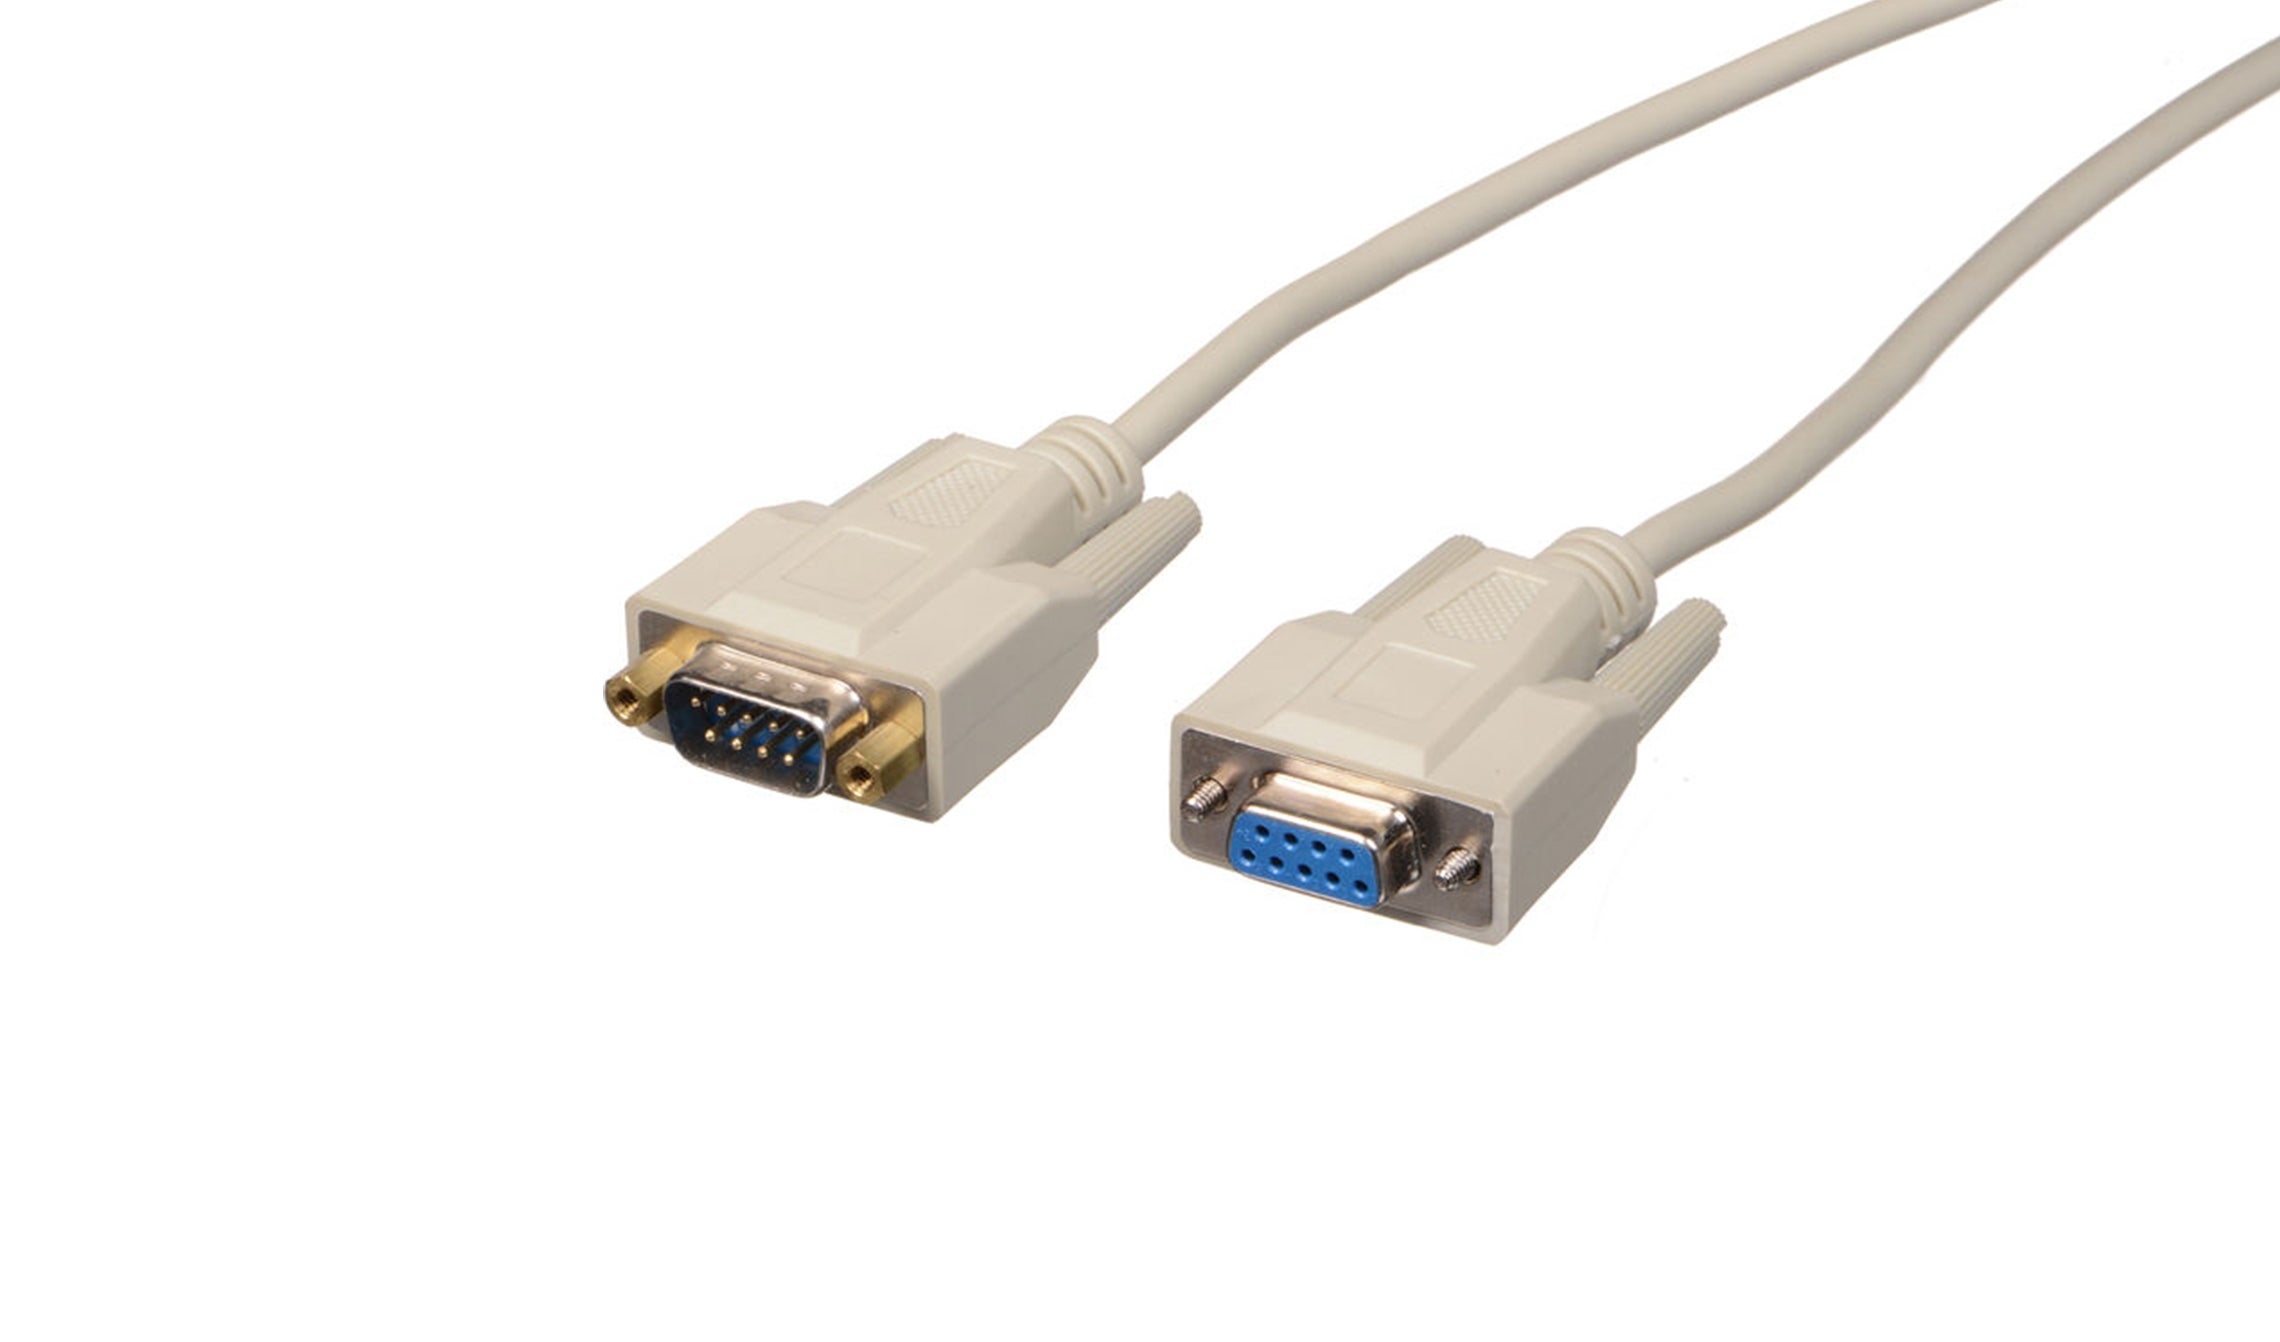 https://www.safescan.com/static/images/Spare-Parts_2280x1342_1250-Printer-Cable/22343/2280x1342/revision-1/Spare-Parts_2280x1342_1250-Printer-Cable.jpg